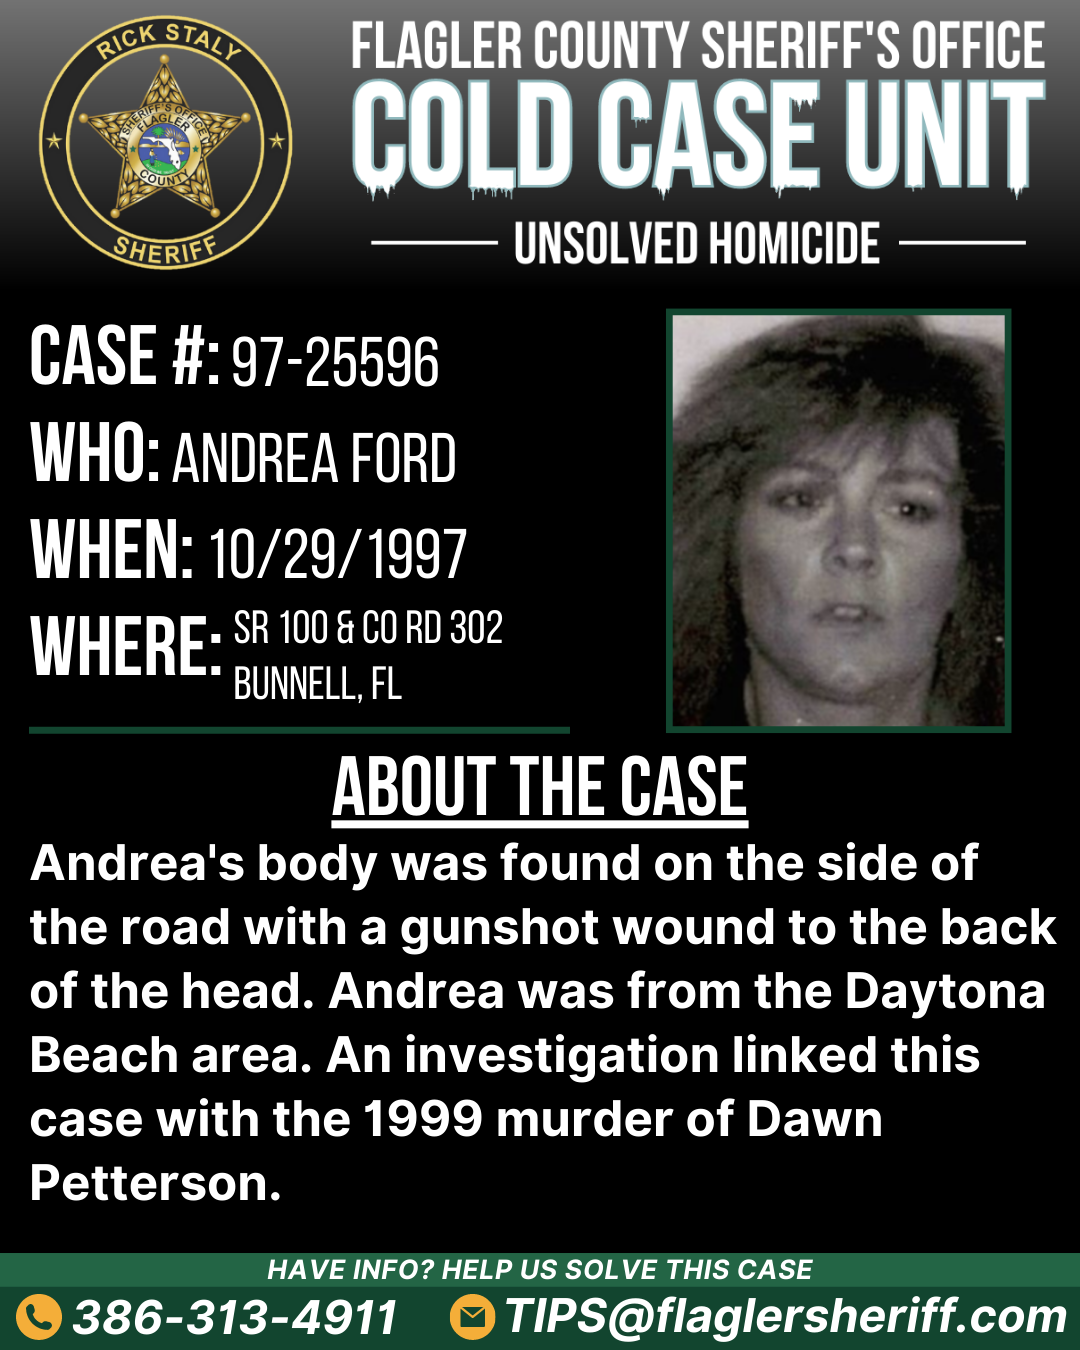 Unsolved homicide. Case #97-25596. Who: Andrea Ford. When: 10/29/1997. Where: SR 100 & County Road 302 (Bunnell, FL). About the case: Andrea's body was found on the side of the road with a gunshot wound to the back of the head. Andrea was from the Daytona Beach area. An investigation linked this case with the 1999 murder of Dawn Petterson.